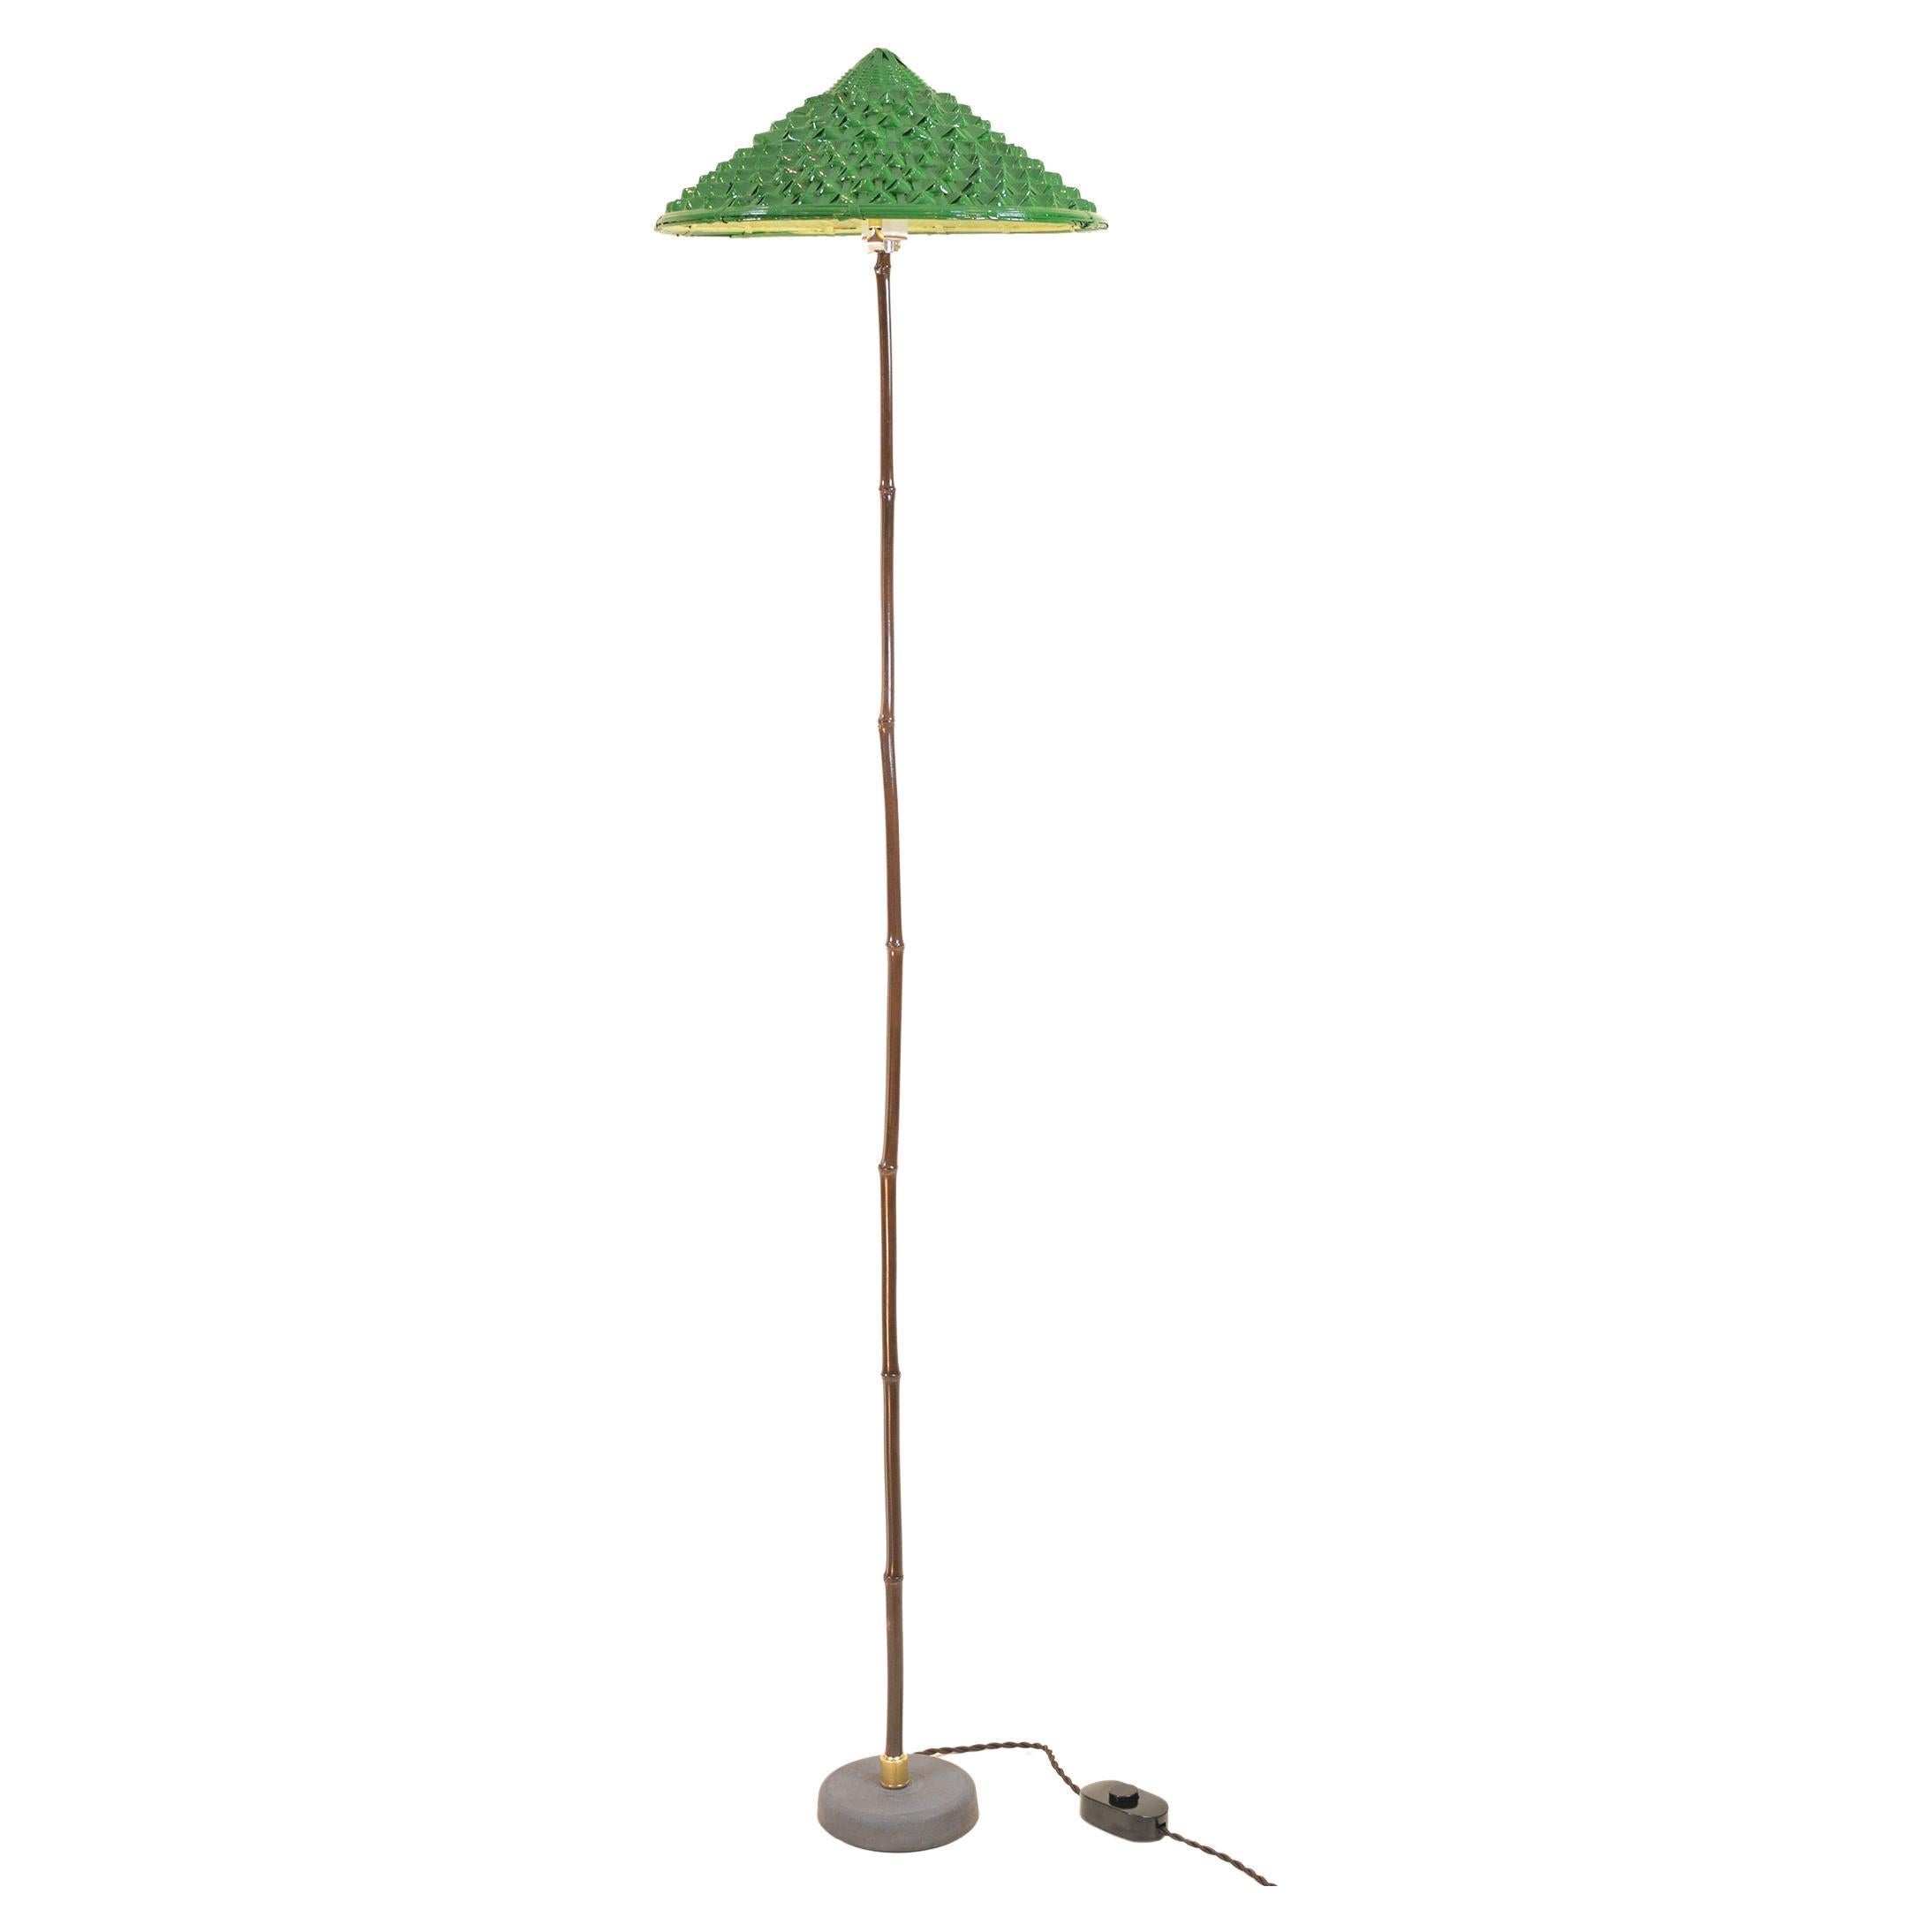 Indoor/Outdoor Black Bamboo Floor Lamp with Hand-Painted Woven-Grass Shade